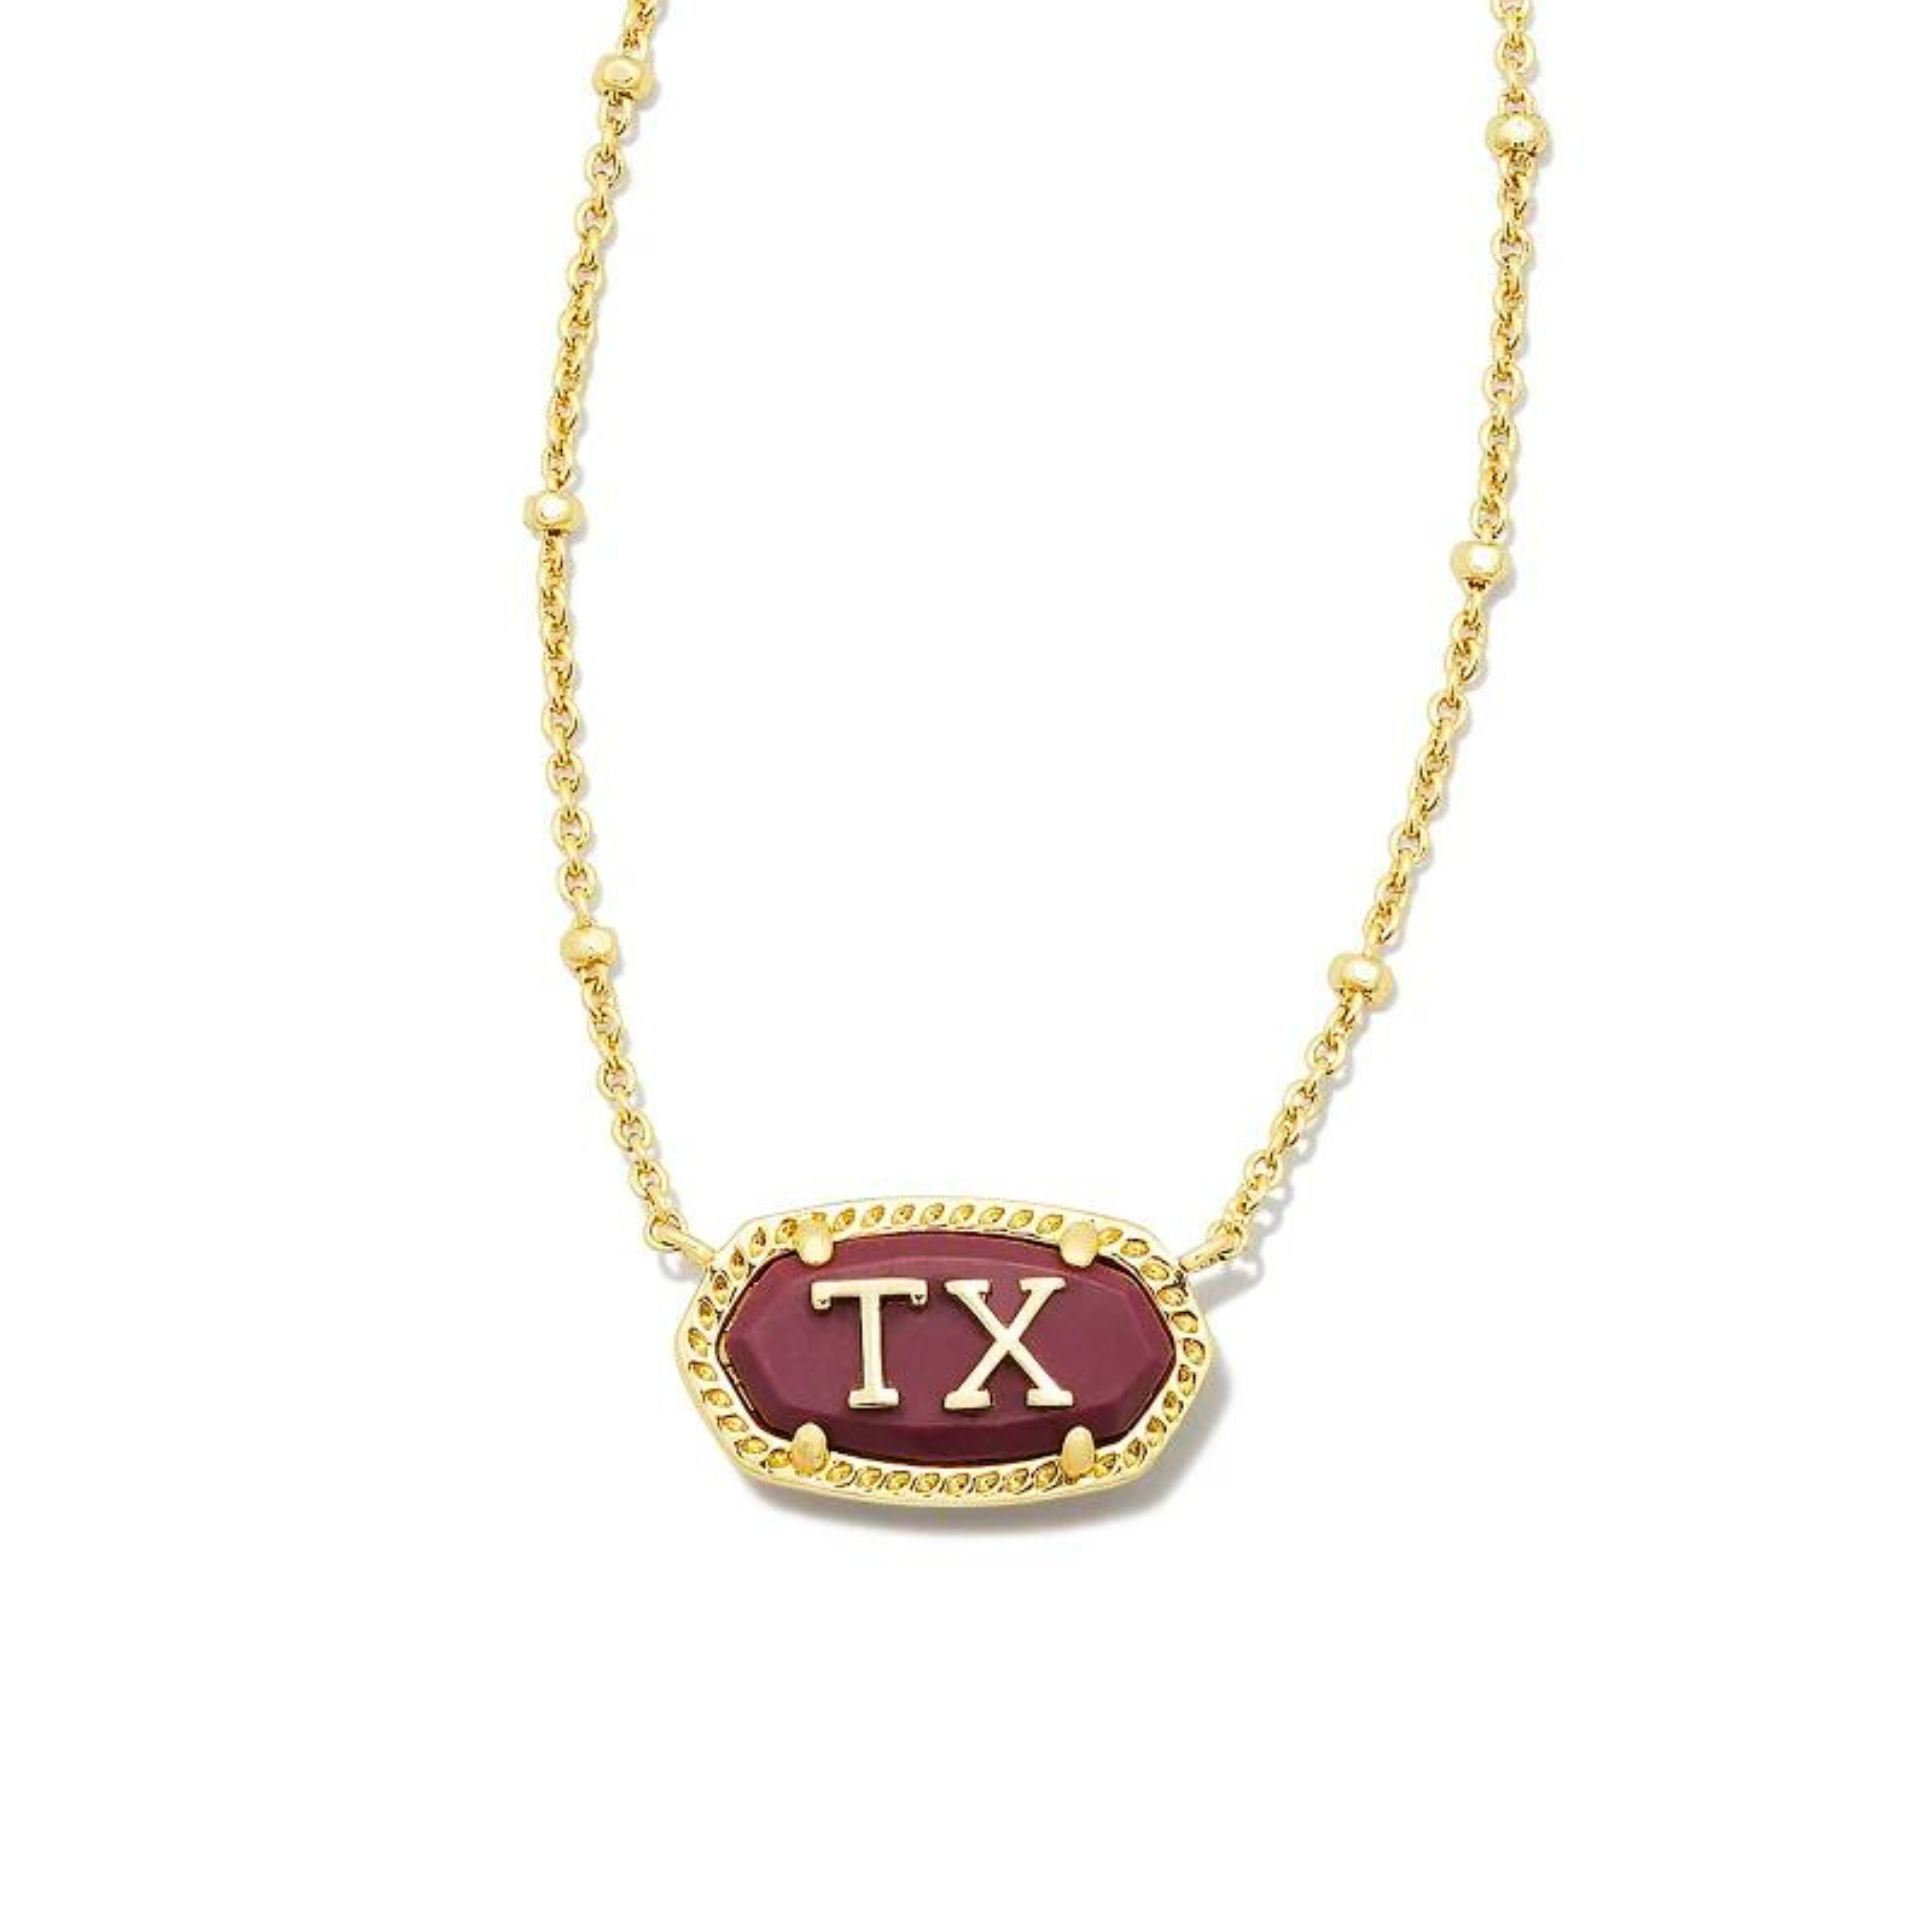 Pictured on a white background is a gold chain necklace with a maroon stone, oval pendant. This pendant has a gold outline and gold "TX" in the center.  